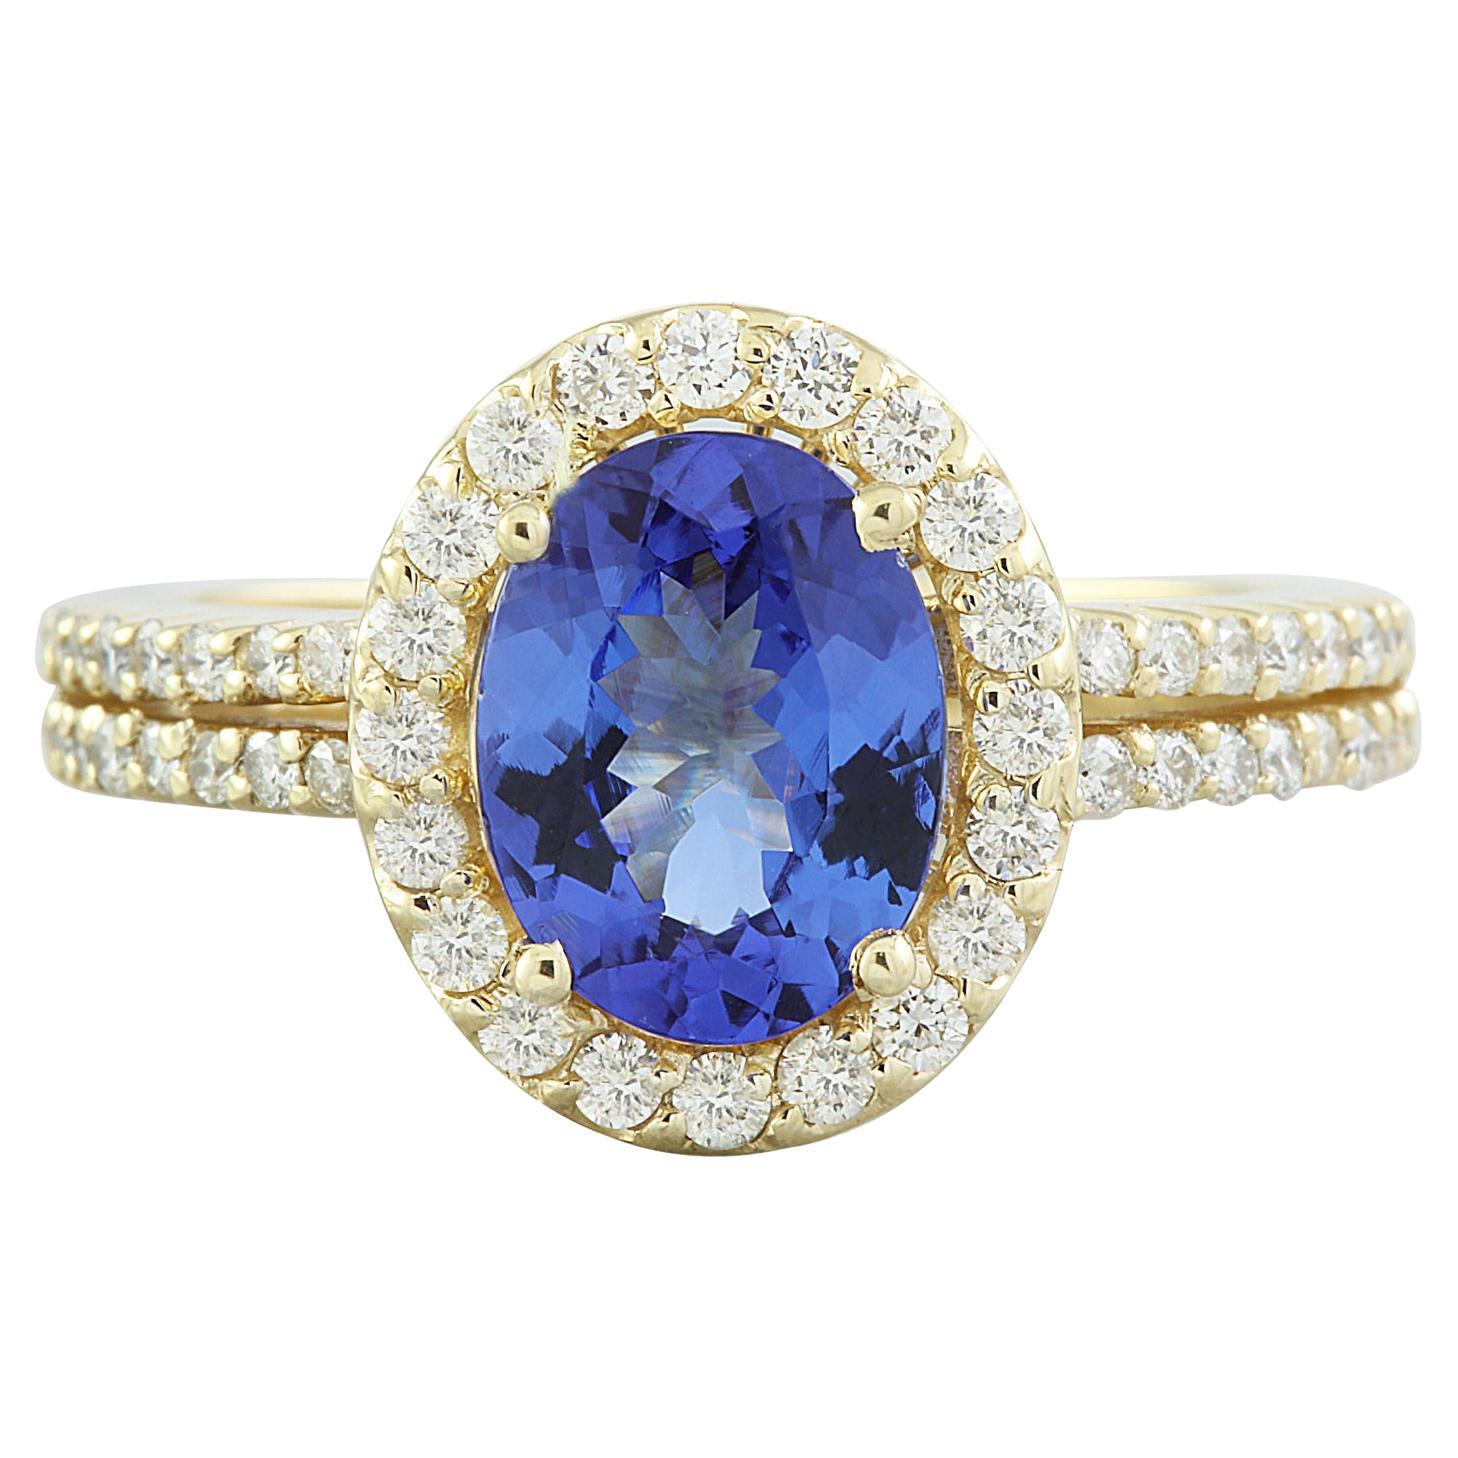 Exquisite Natural Tanzanite Diamond Ring in 14K Yellow Gold For Sale